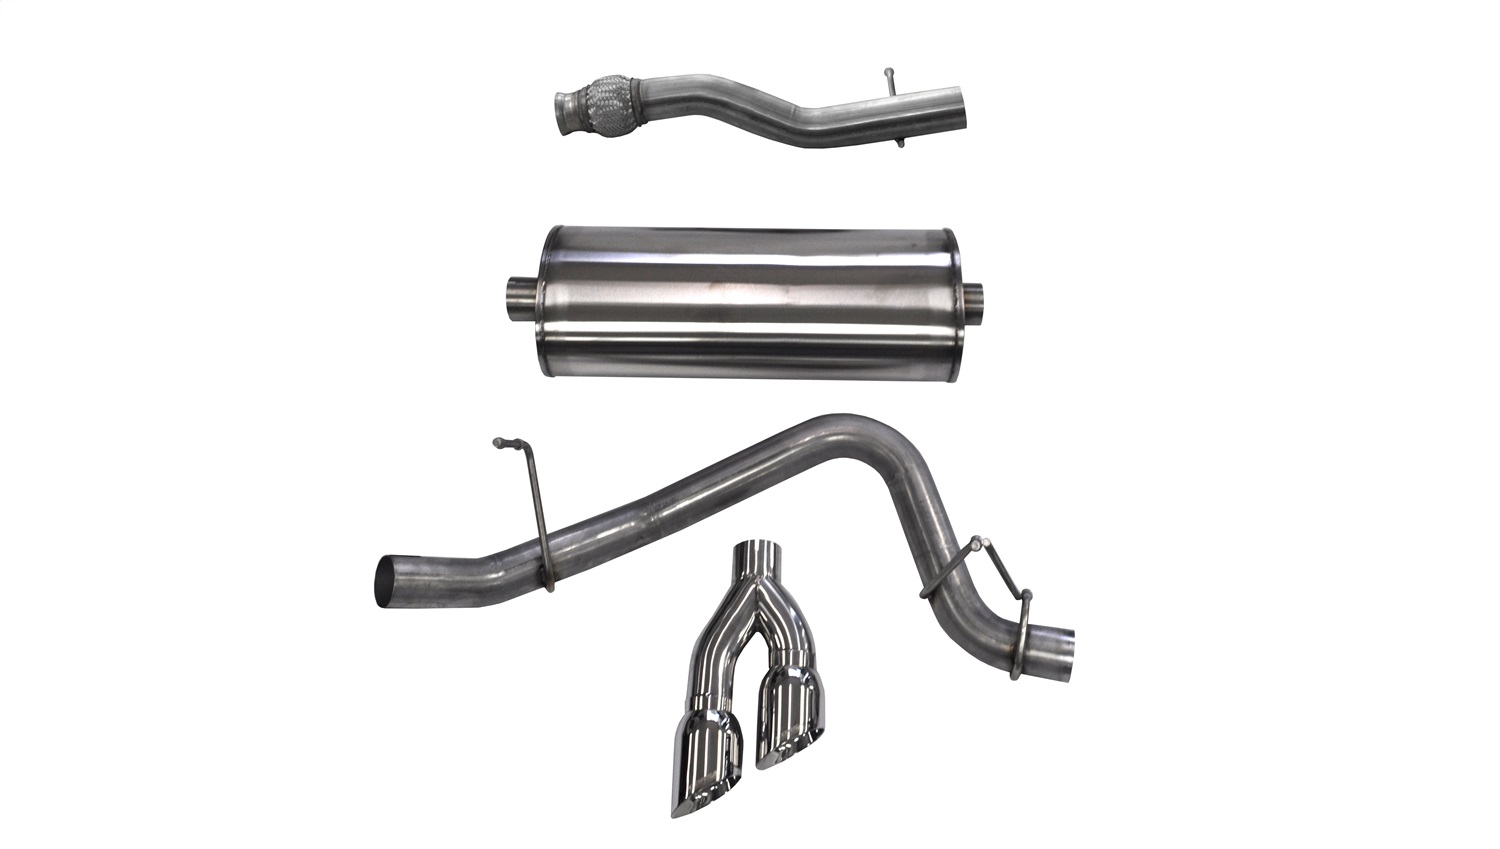 Corsa Performance 14748 Sport Cat-Back Exhaust System